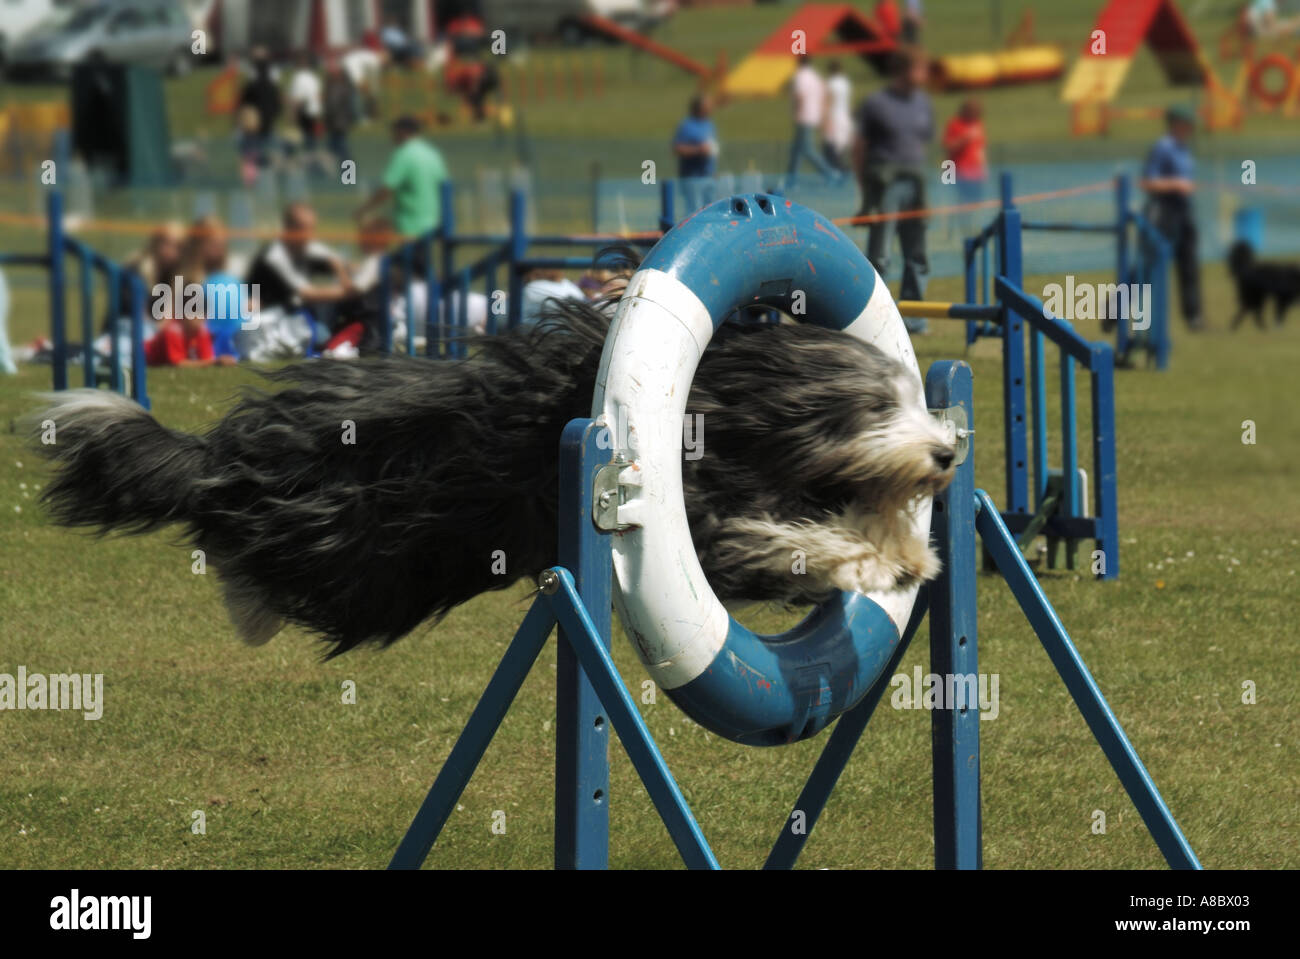 Border Collie Club of Great Britain